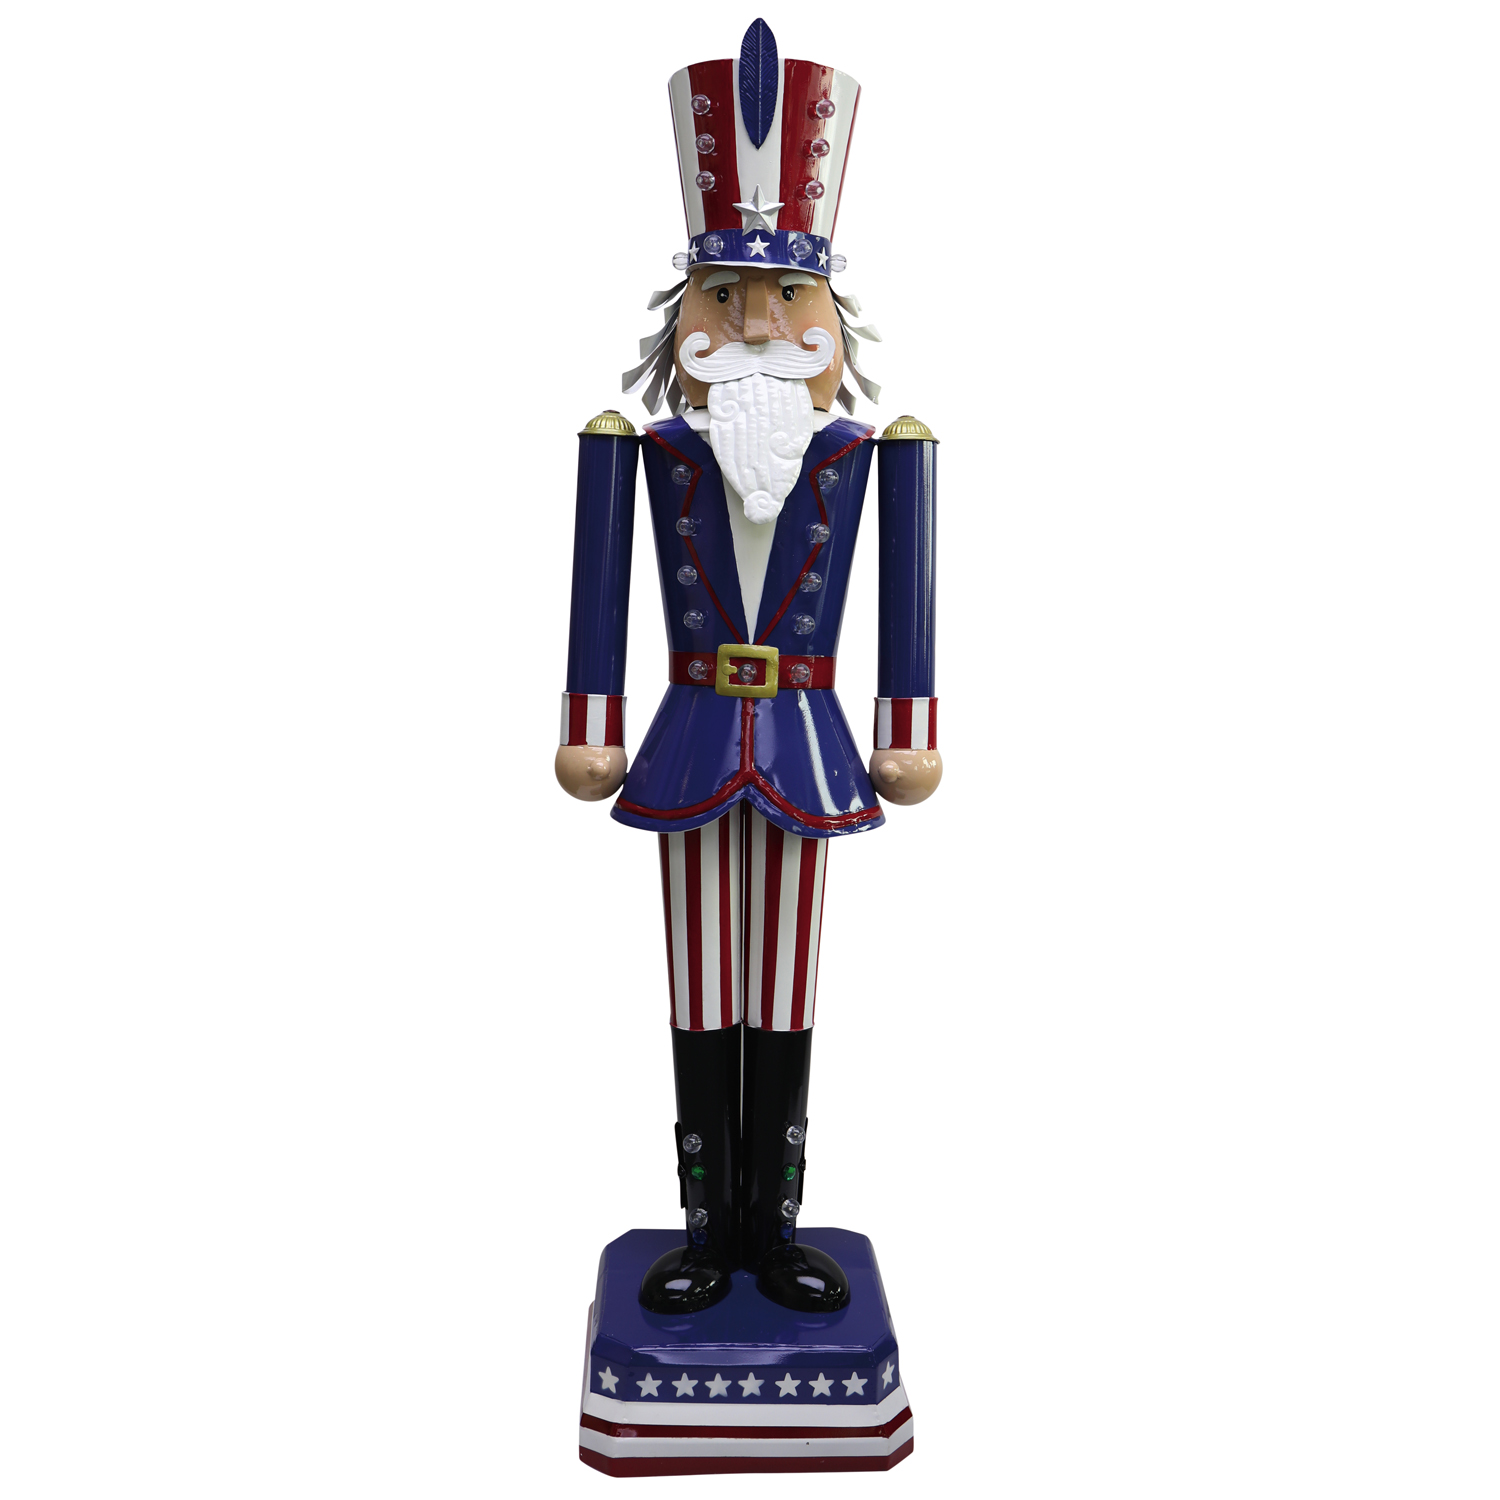 Evergreen 50"H Battery Operated Metal Uncle Sam Garden Statuary, 50.5'' x 9.9'' x 9.9'' inches - image 1 of 3